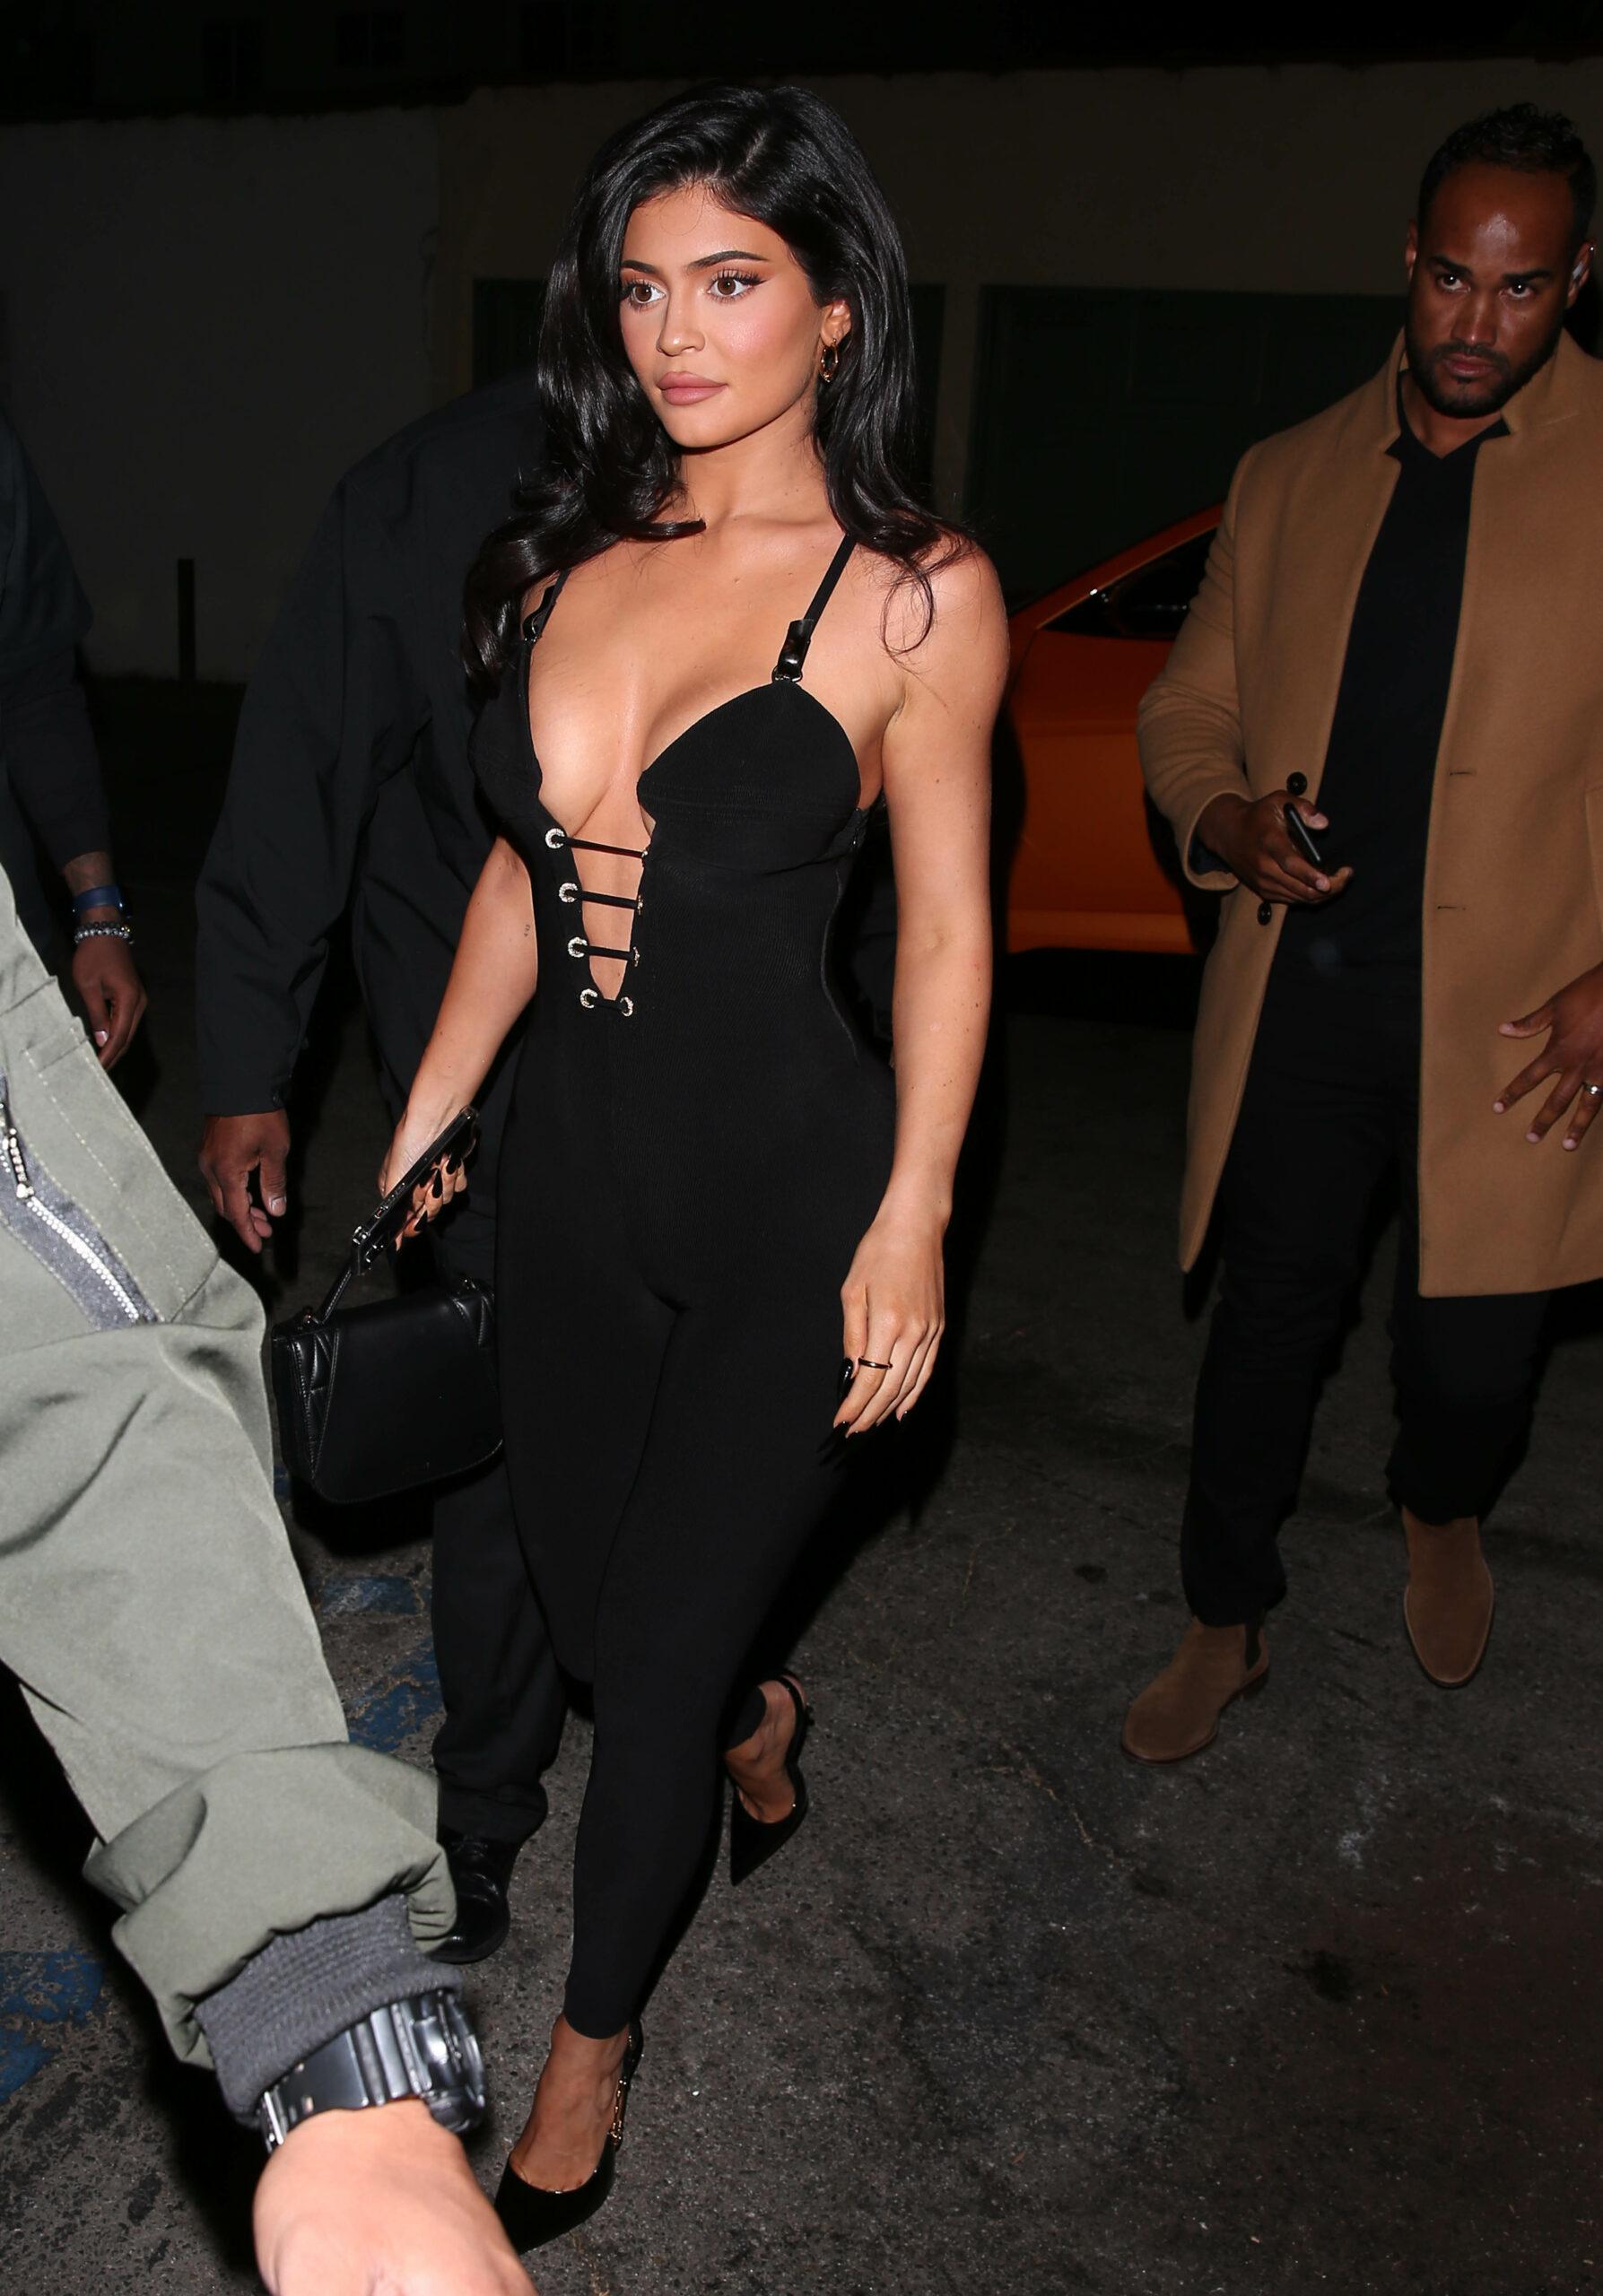 Kylie Jenner Kim and Khloe Kardashian head out for dinner at Craigs in West Hollywood CA